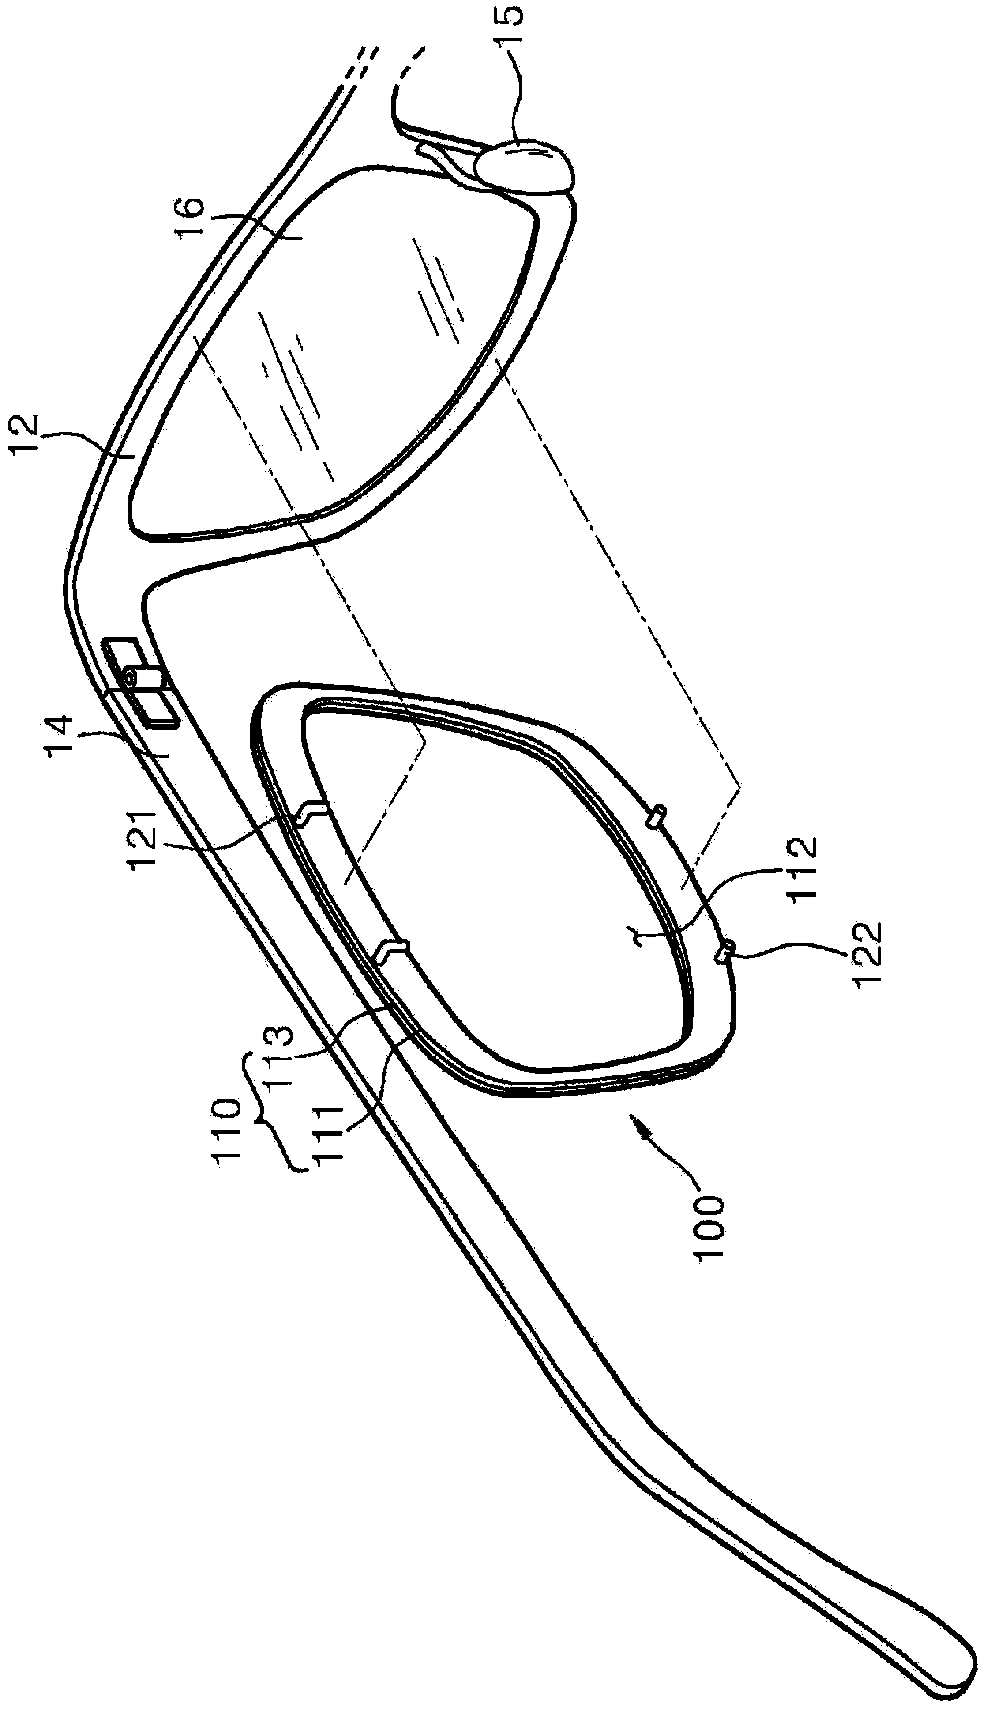 Drug carrier device attachable to glasses